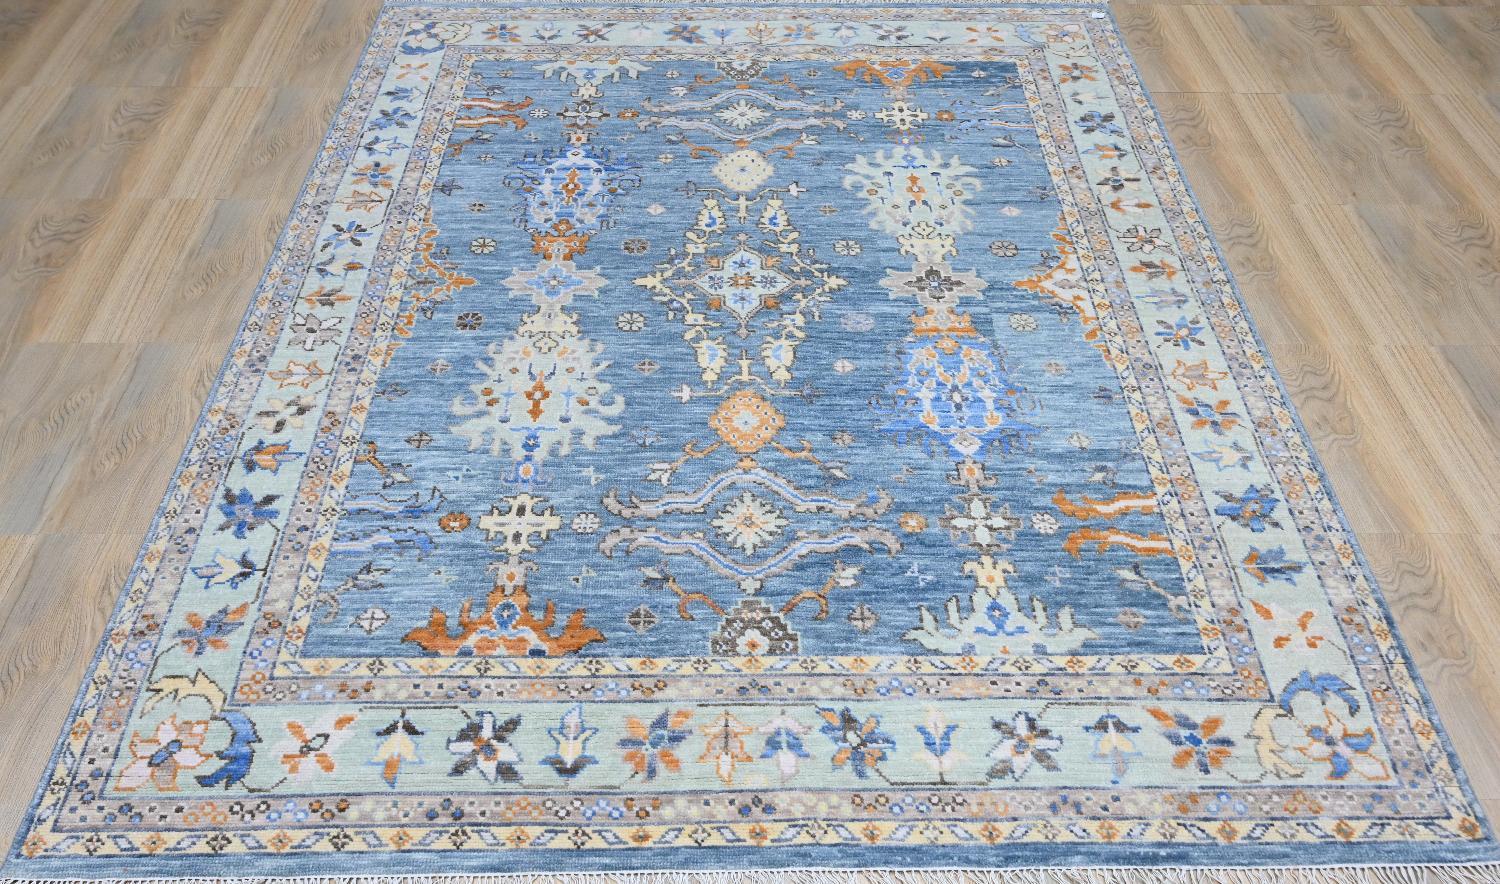 Introducing our model of exquisite new rug featuring a stunning Oushak design and delightful color palette. Entirely hand-knotted with precision, it boasts a luxurious blend of wool velvet on a cotton foundation. Elevate your space with this elegant